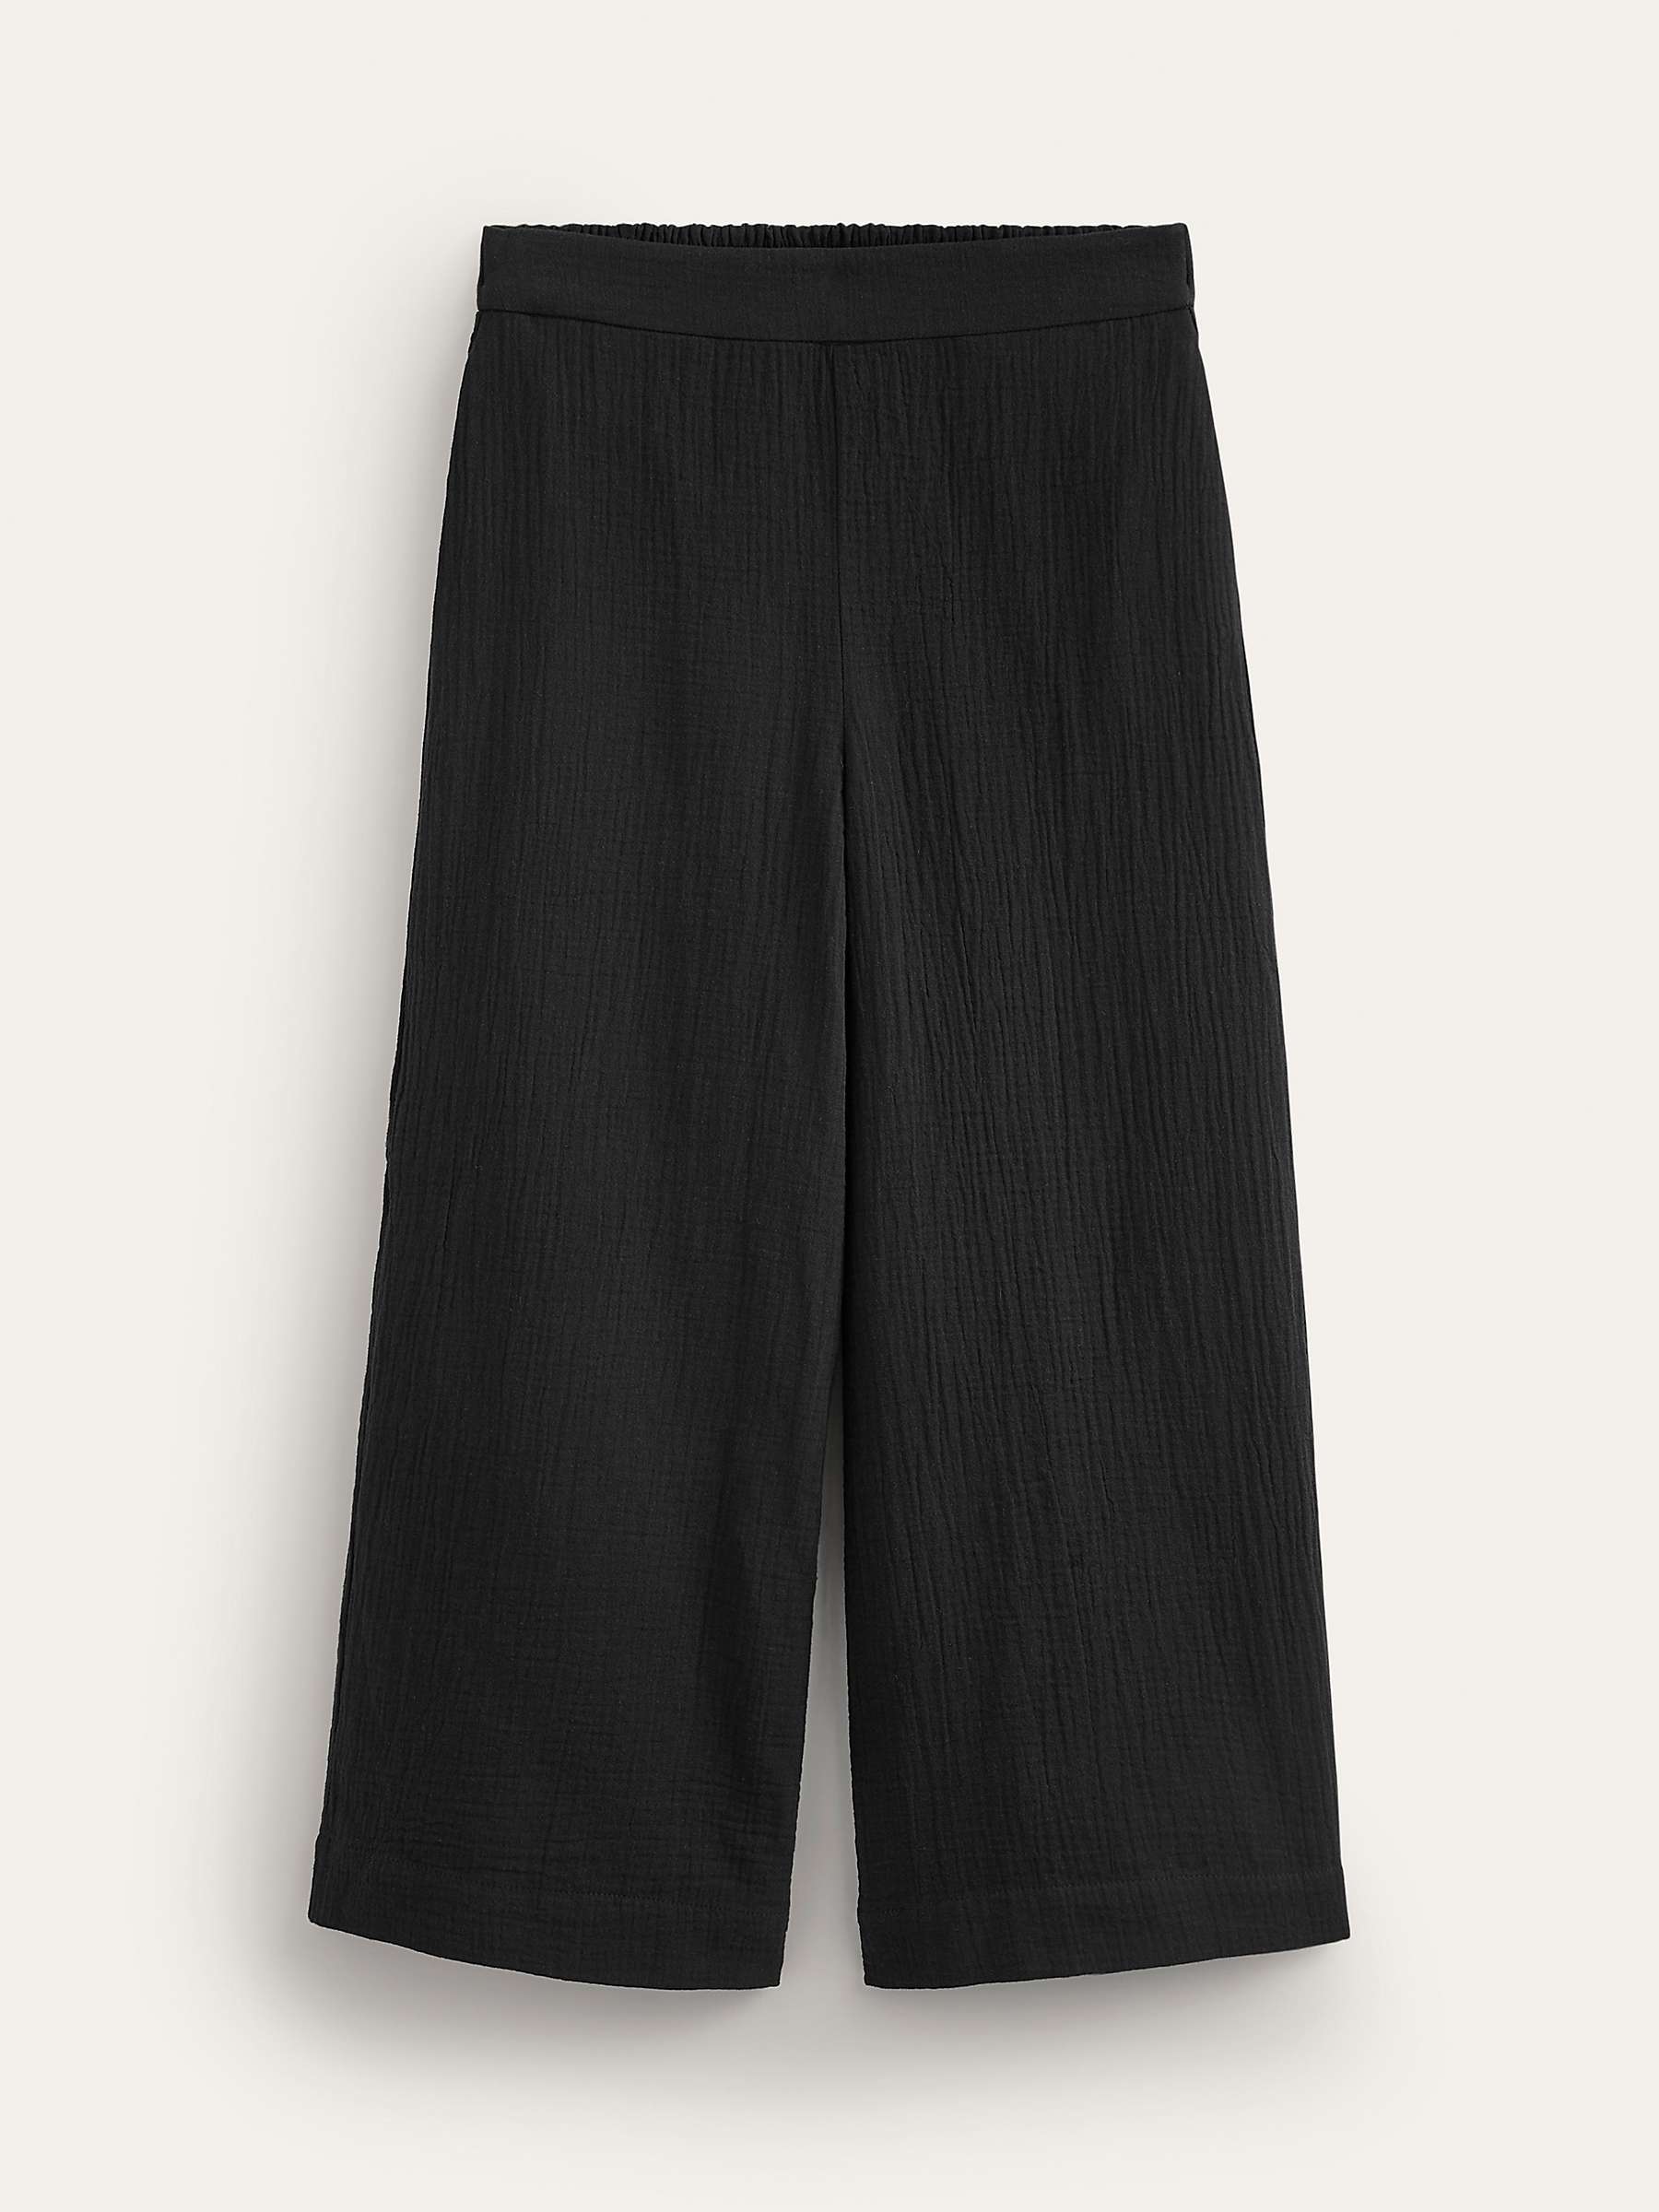 Buy Boden Pull-on Cotton Doublecloth Trousers, Black Online at johnlewis.com